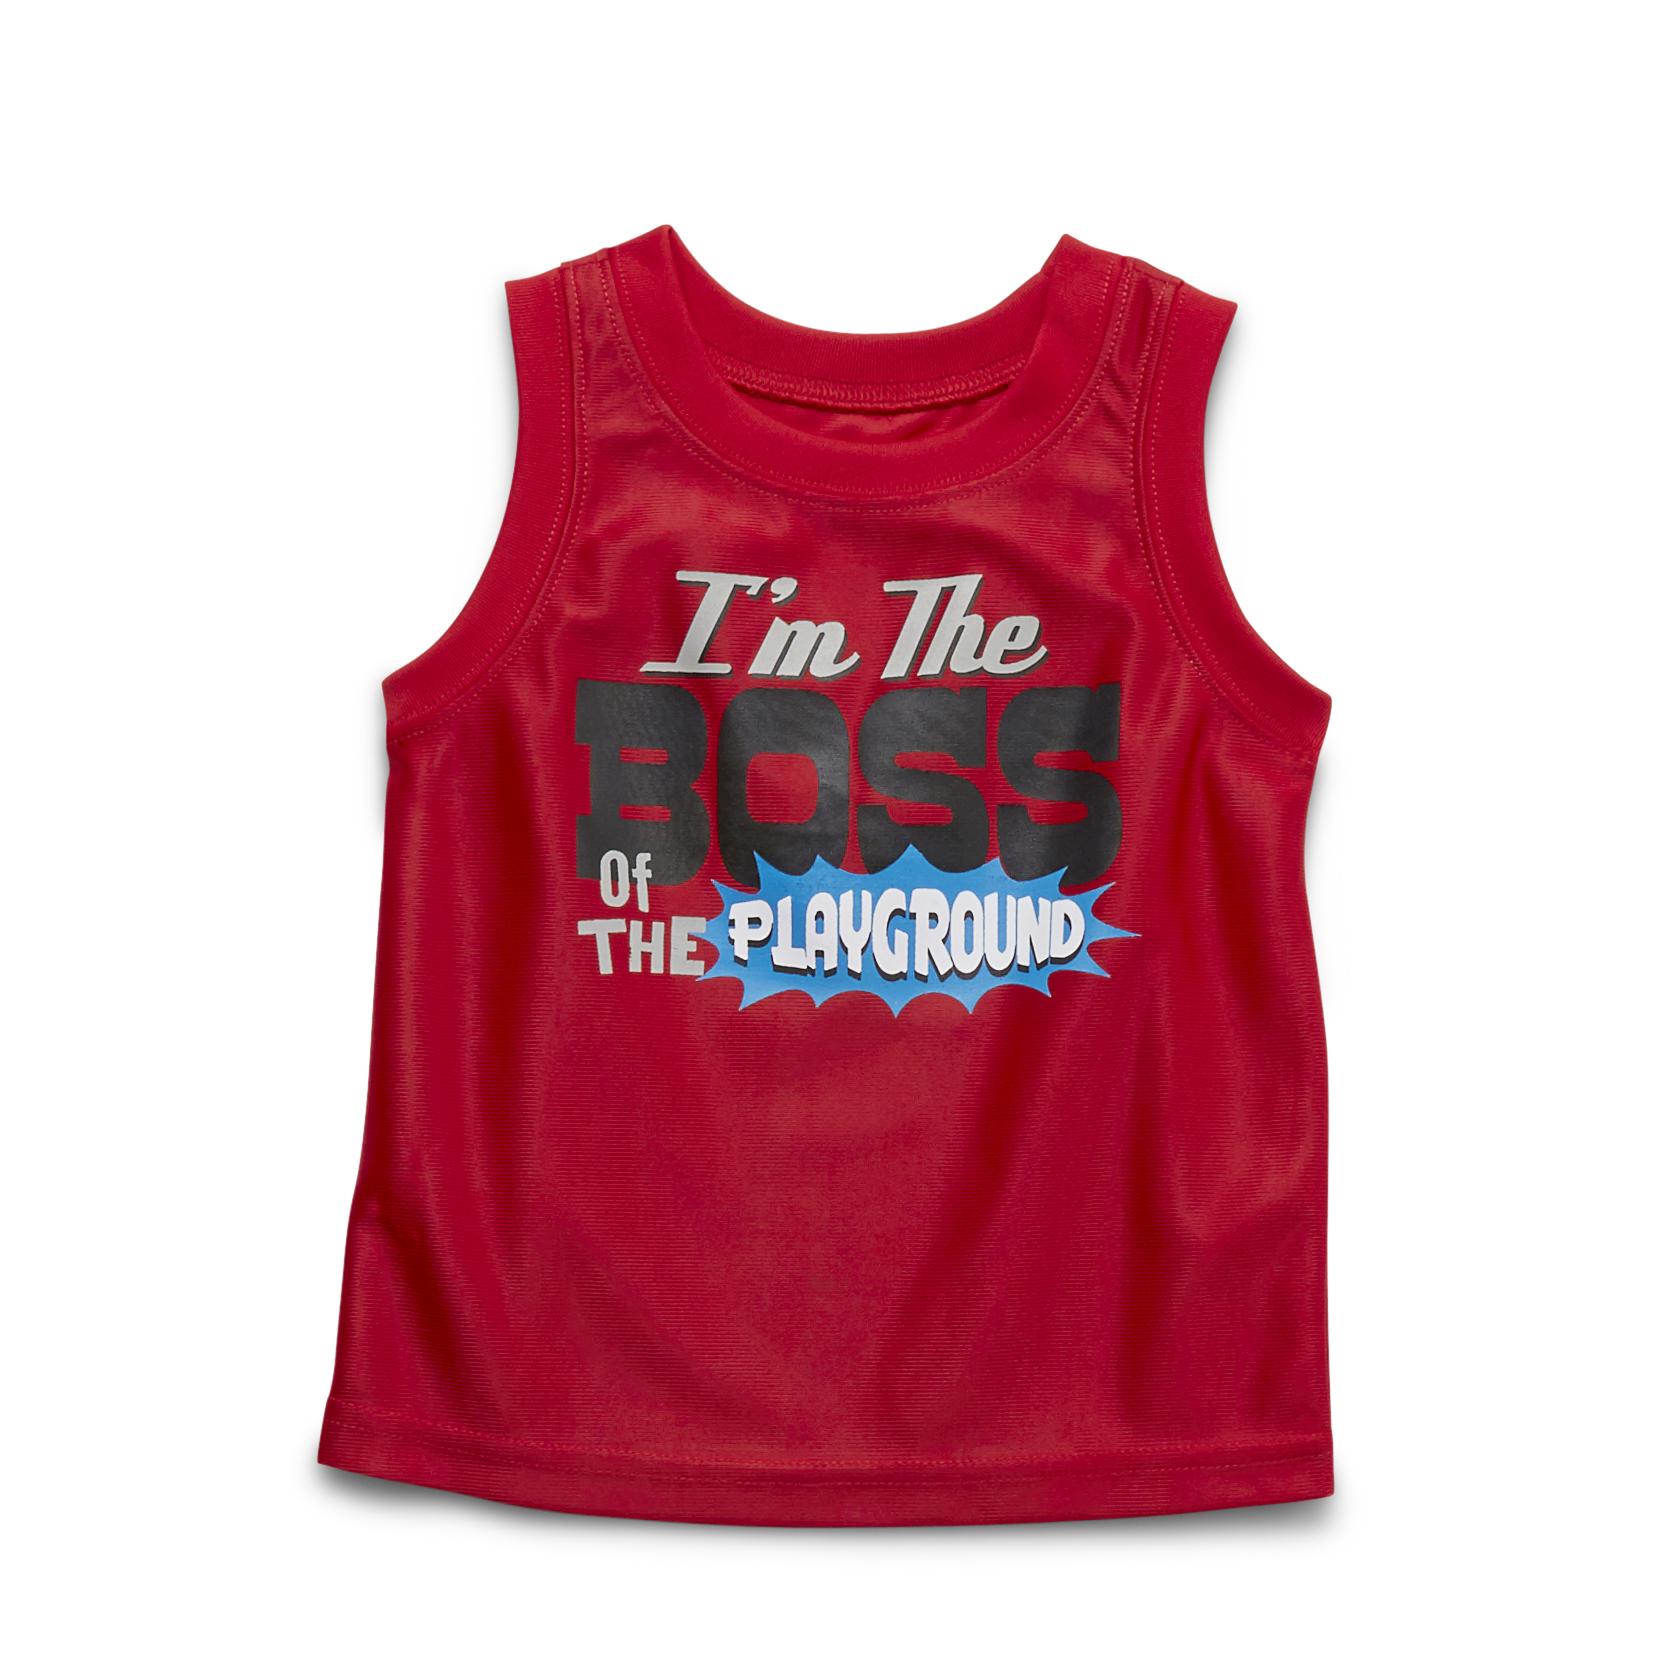 WonderKids Infant & Toddler Boy's Dazzle Muscle T-Shirt - I'm the Boss